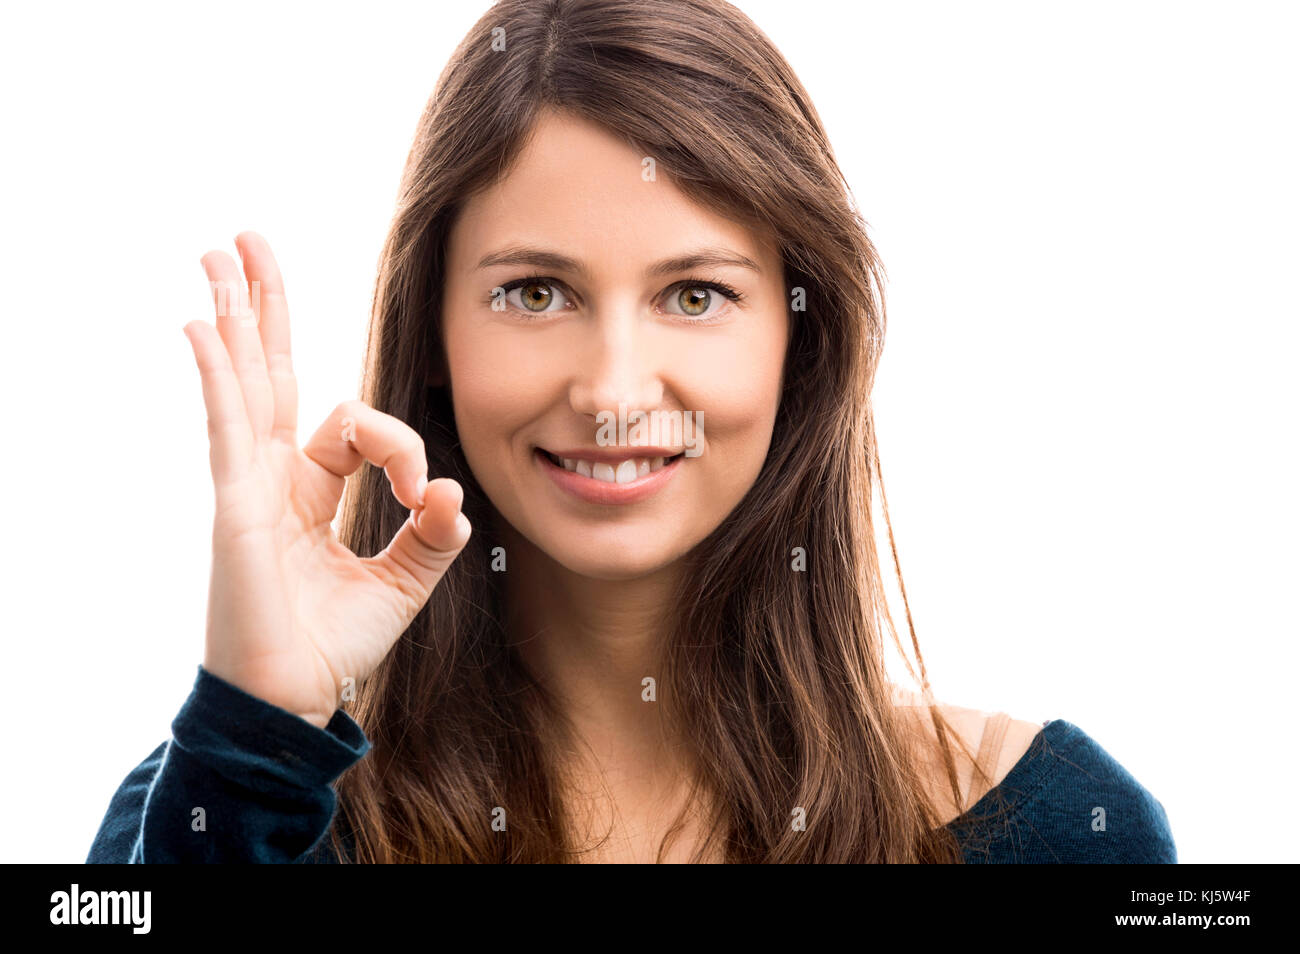 Beautiful woman doing a OK signal with her hand Stock Photo